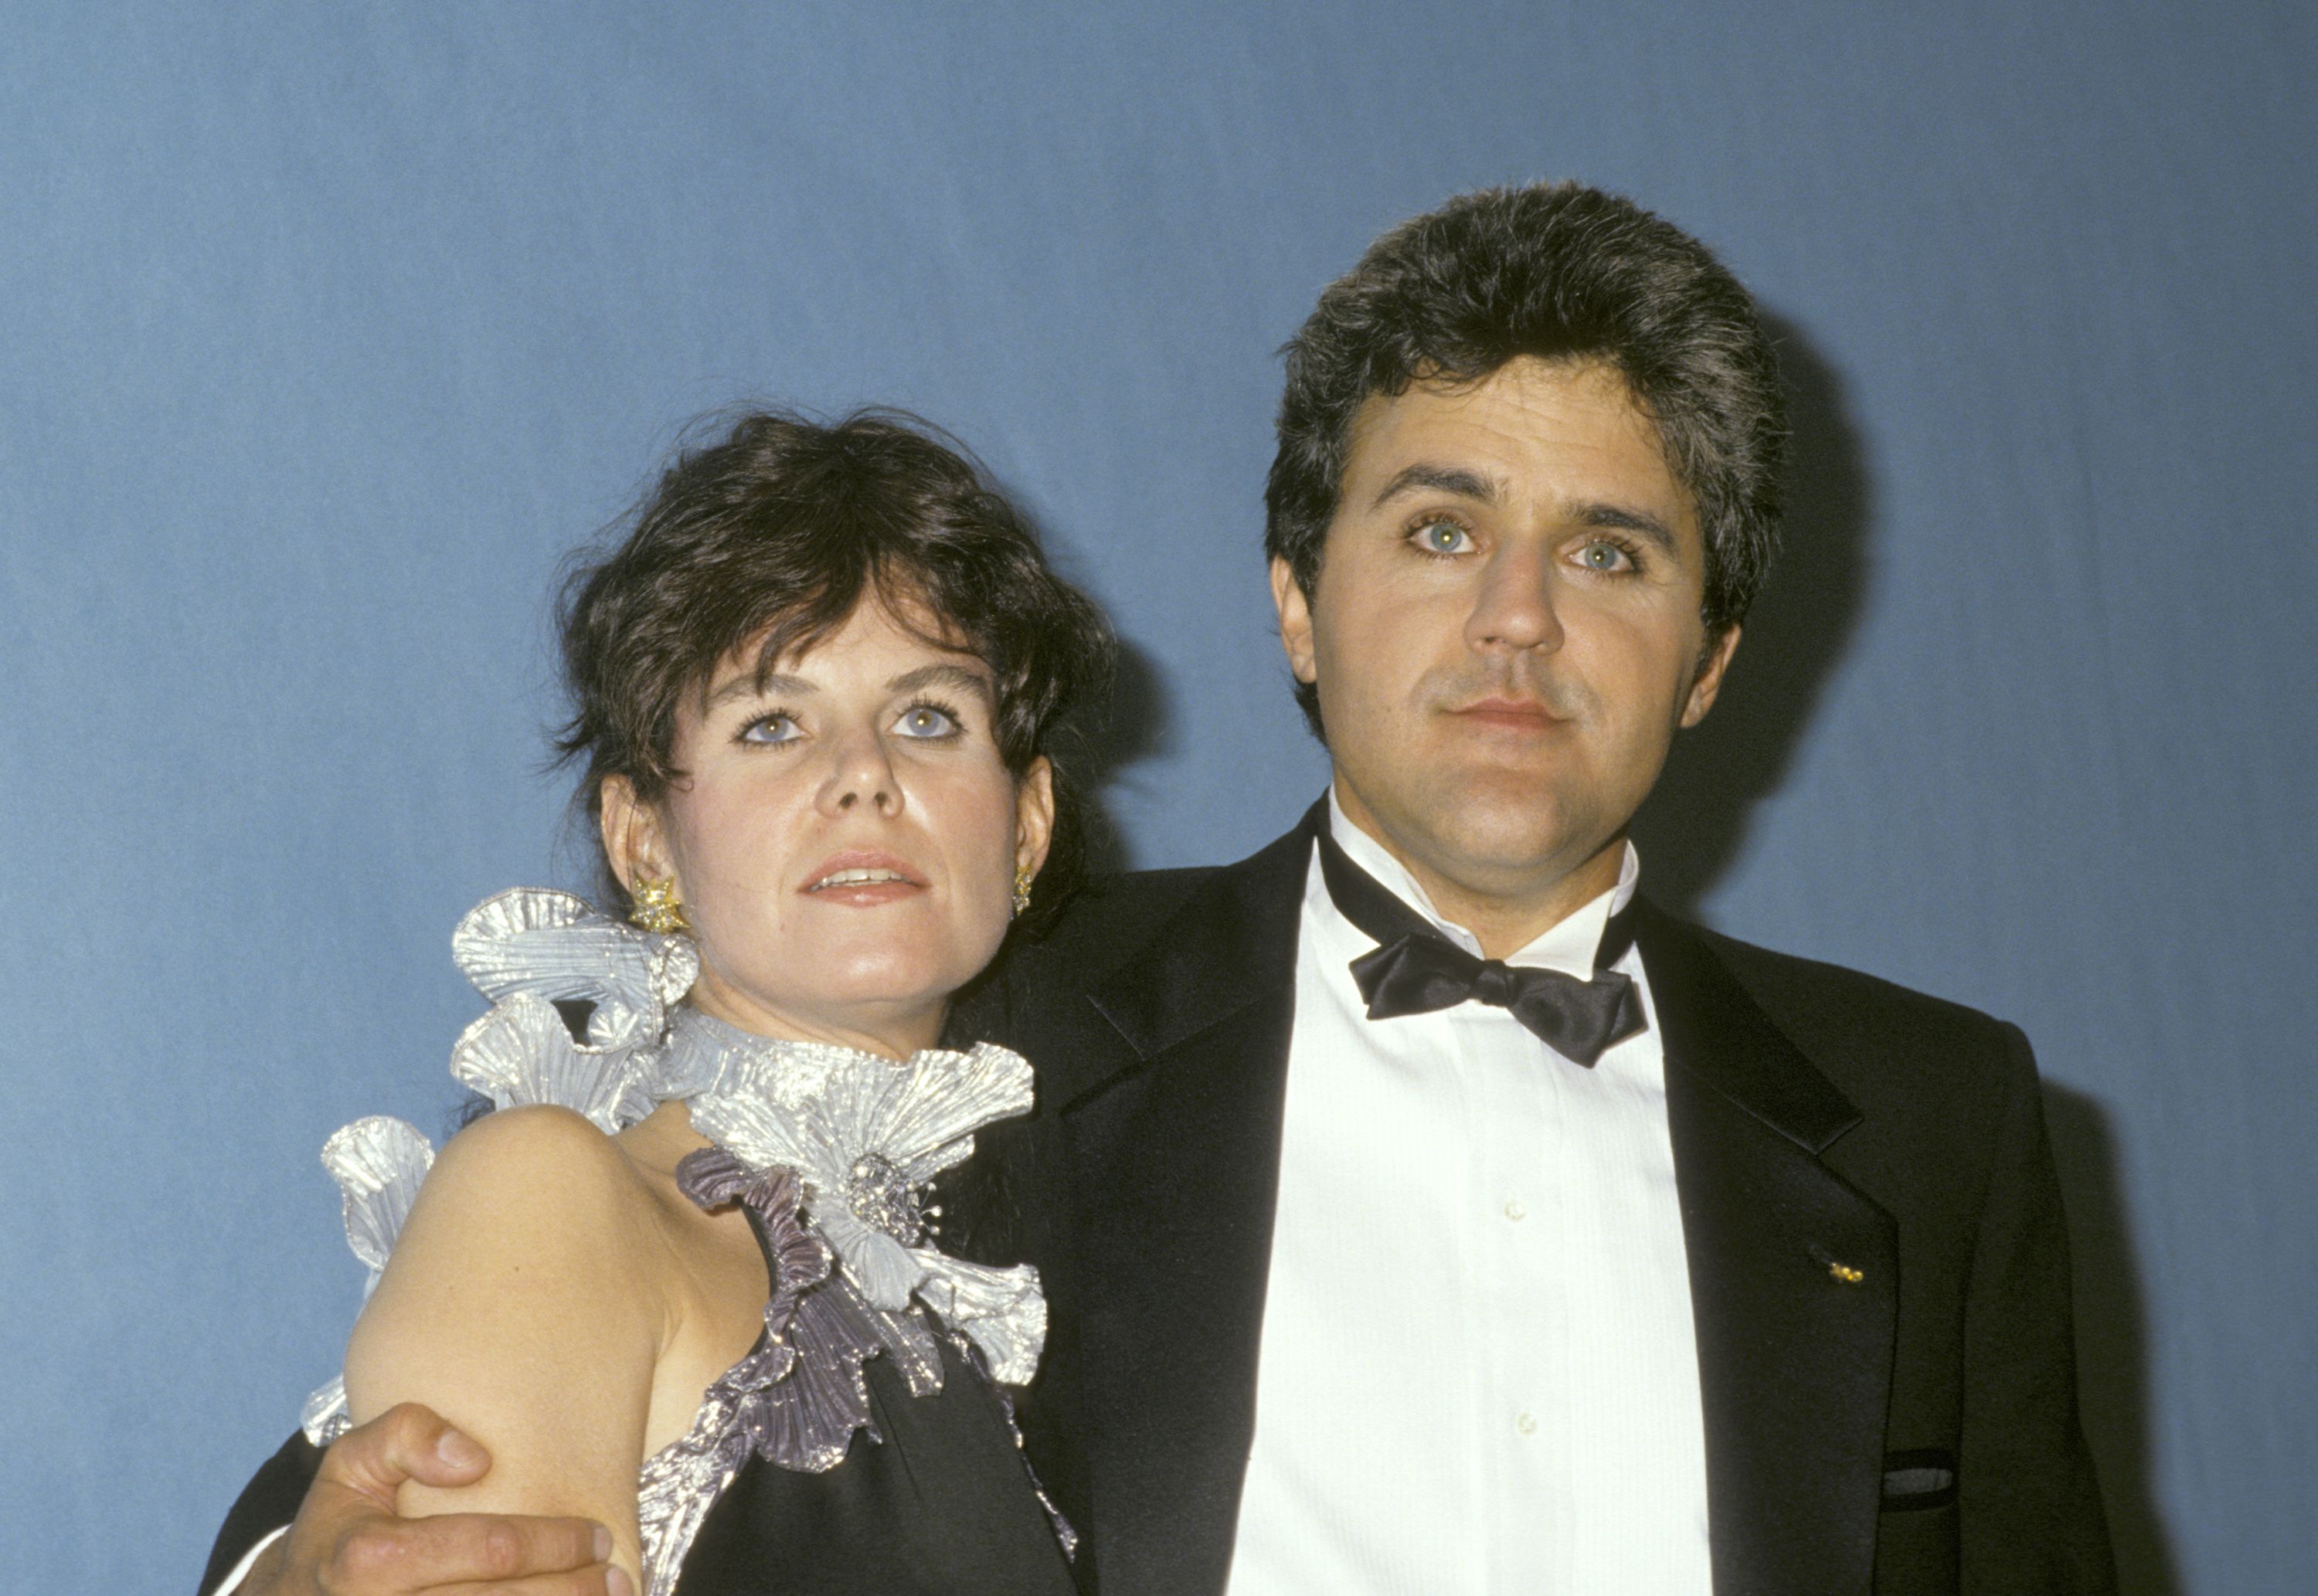 Mavis and Jay Leno during the 39th Annual Emmy Awards on September 20, 1987, in Pasadena, California. | Source: Jim Smeal/Ron Galella Collection/Getty Images